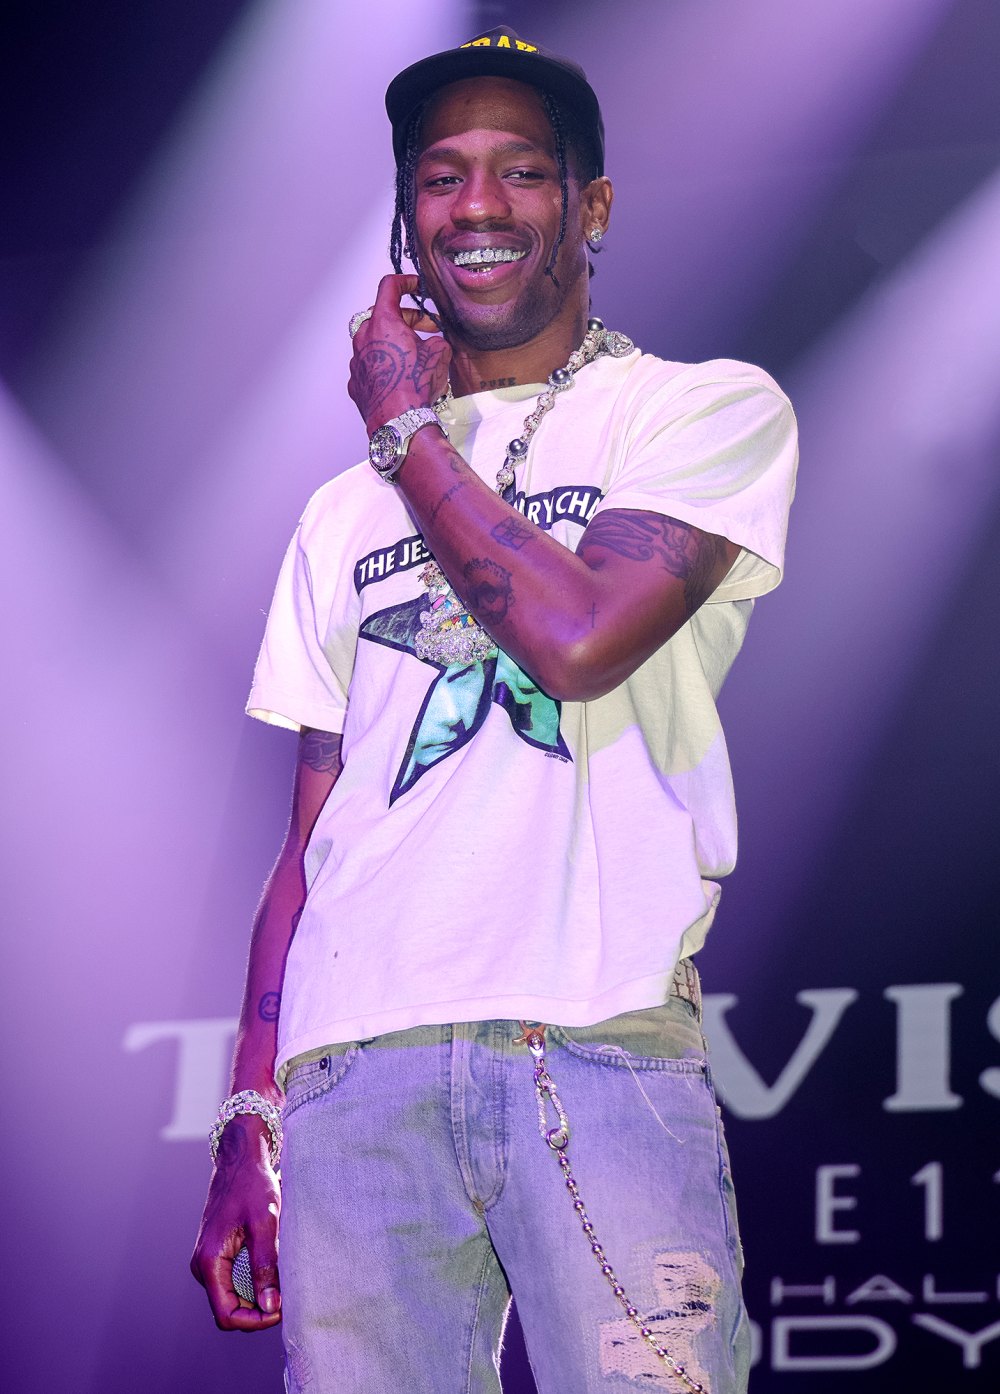 Travis Scott Gives Venue Janitor $5,000 to ‘Take the Night Off’ During Miami Concert